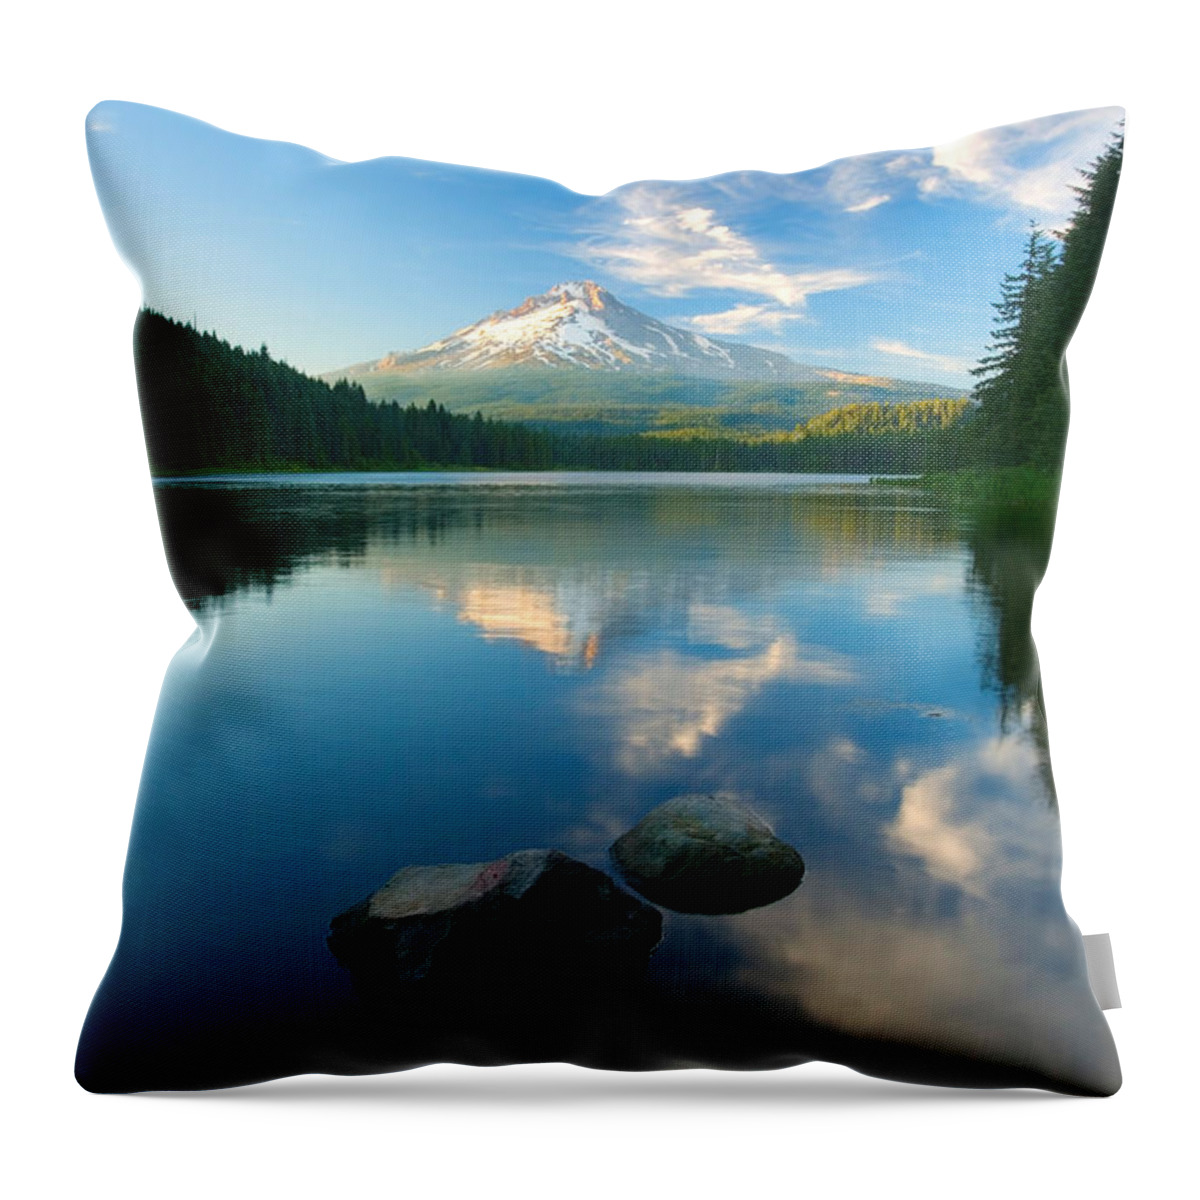 Mt. Hood Throw Pillow featuring the photograph Mt. Hood Cirrus Explosion by Michael Dawson